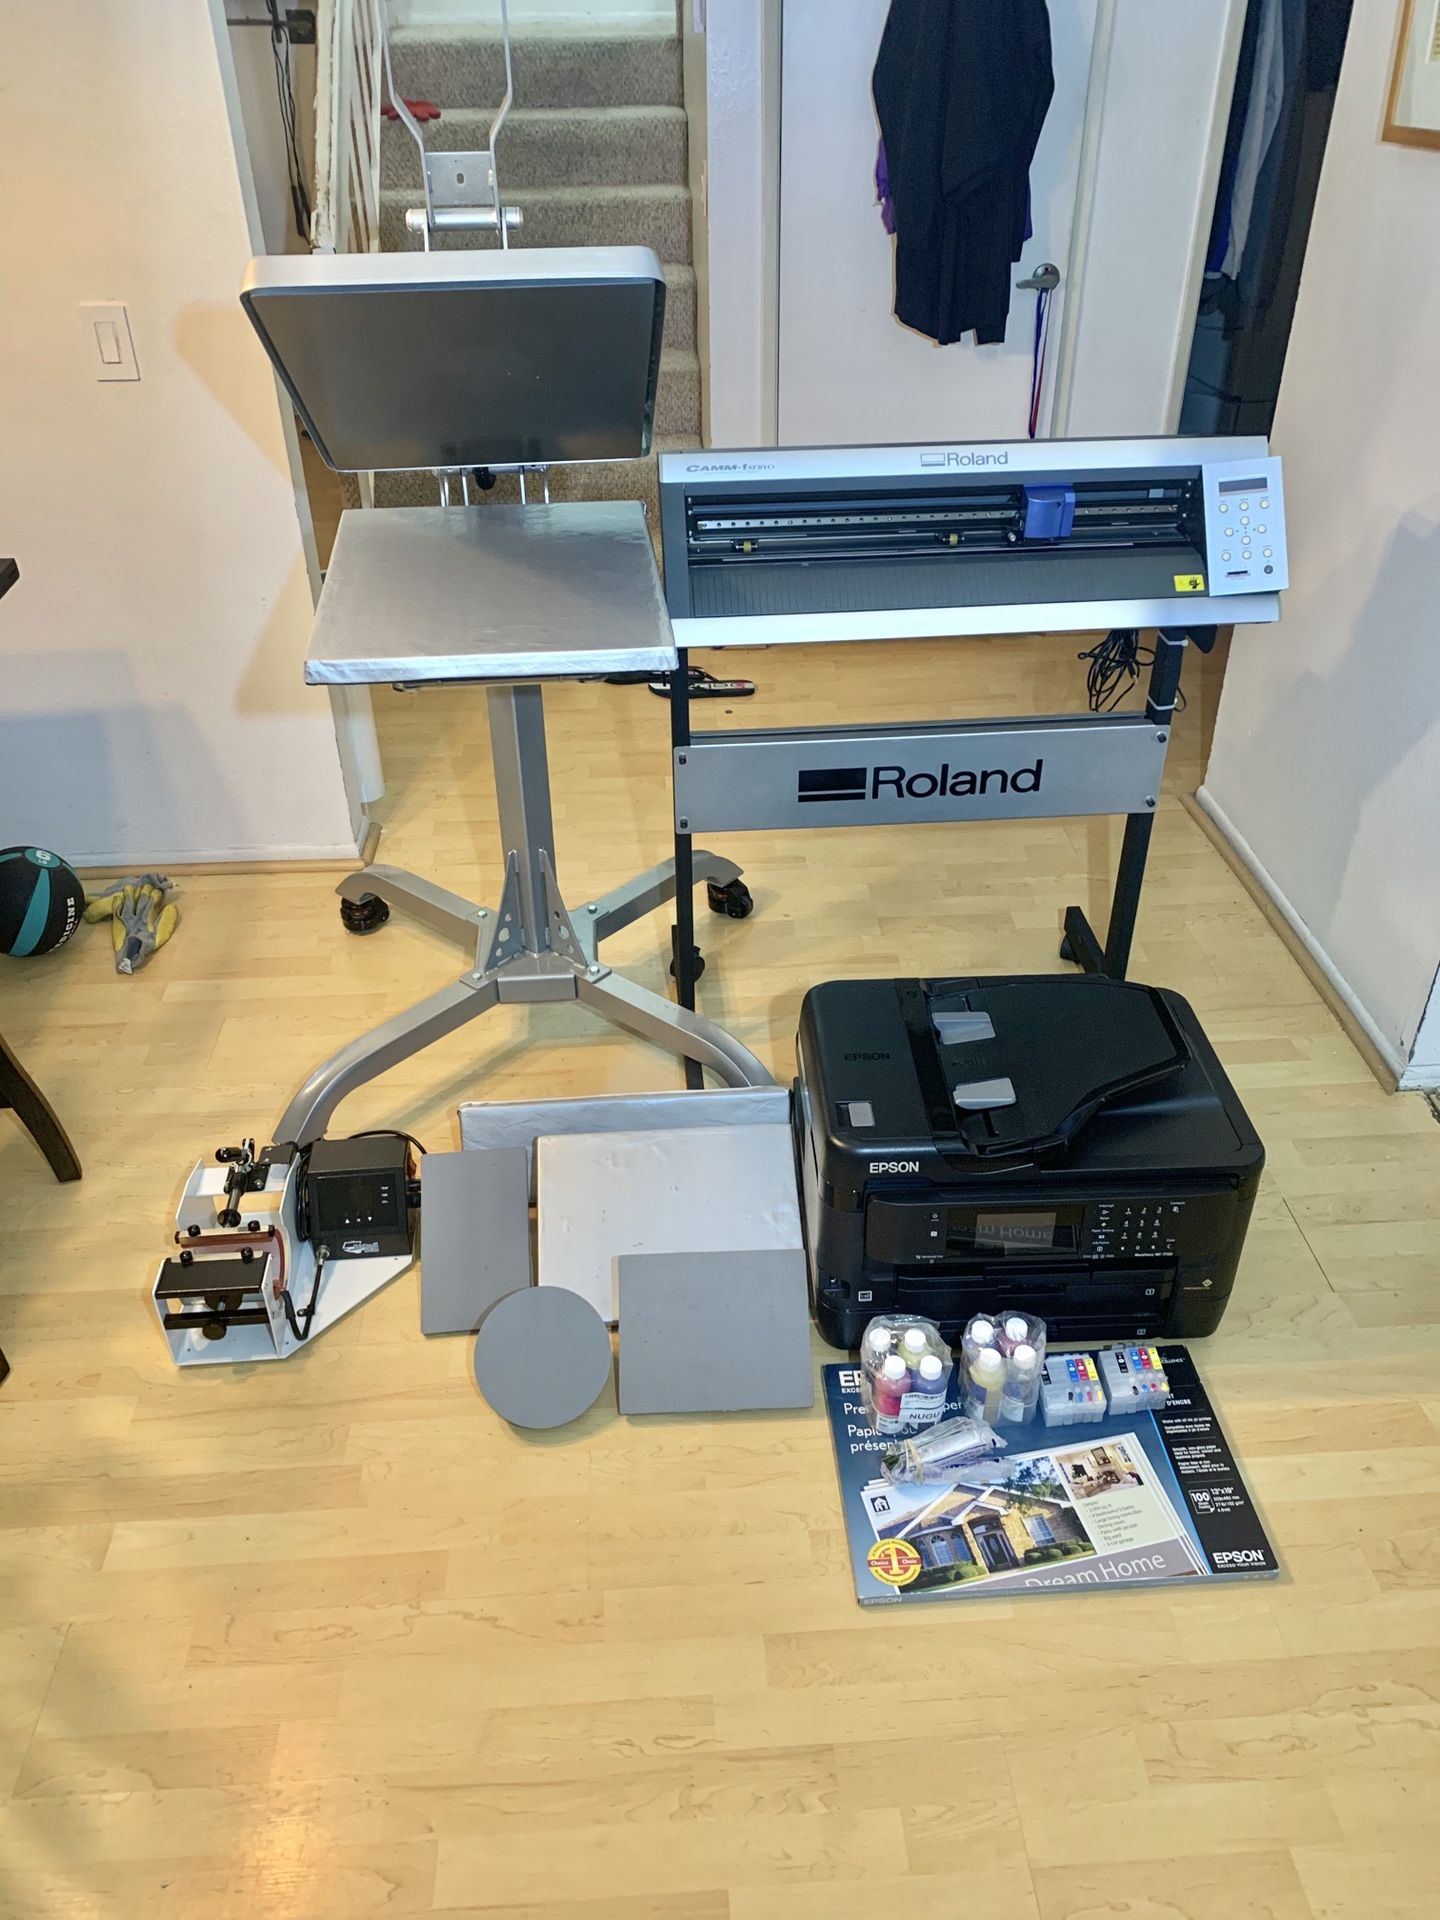 Hotronix STX-20 16x20 heat press + stand + extra (5) platens and platen covers